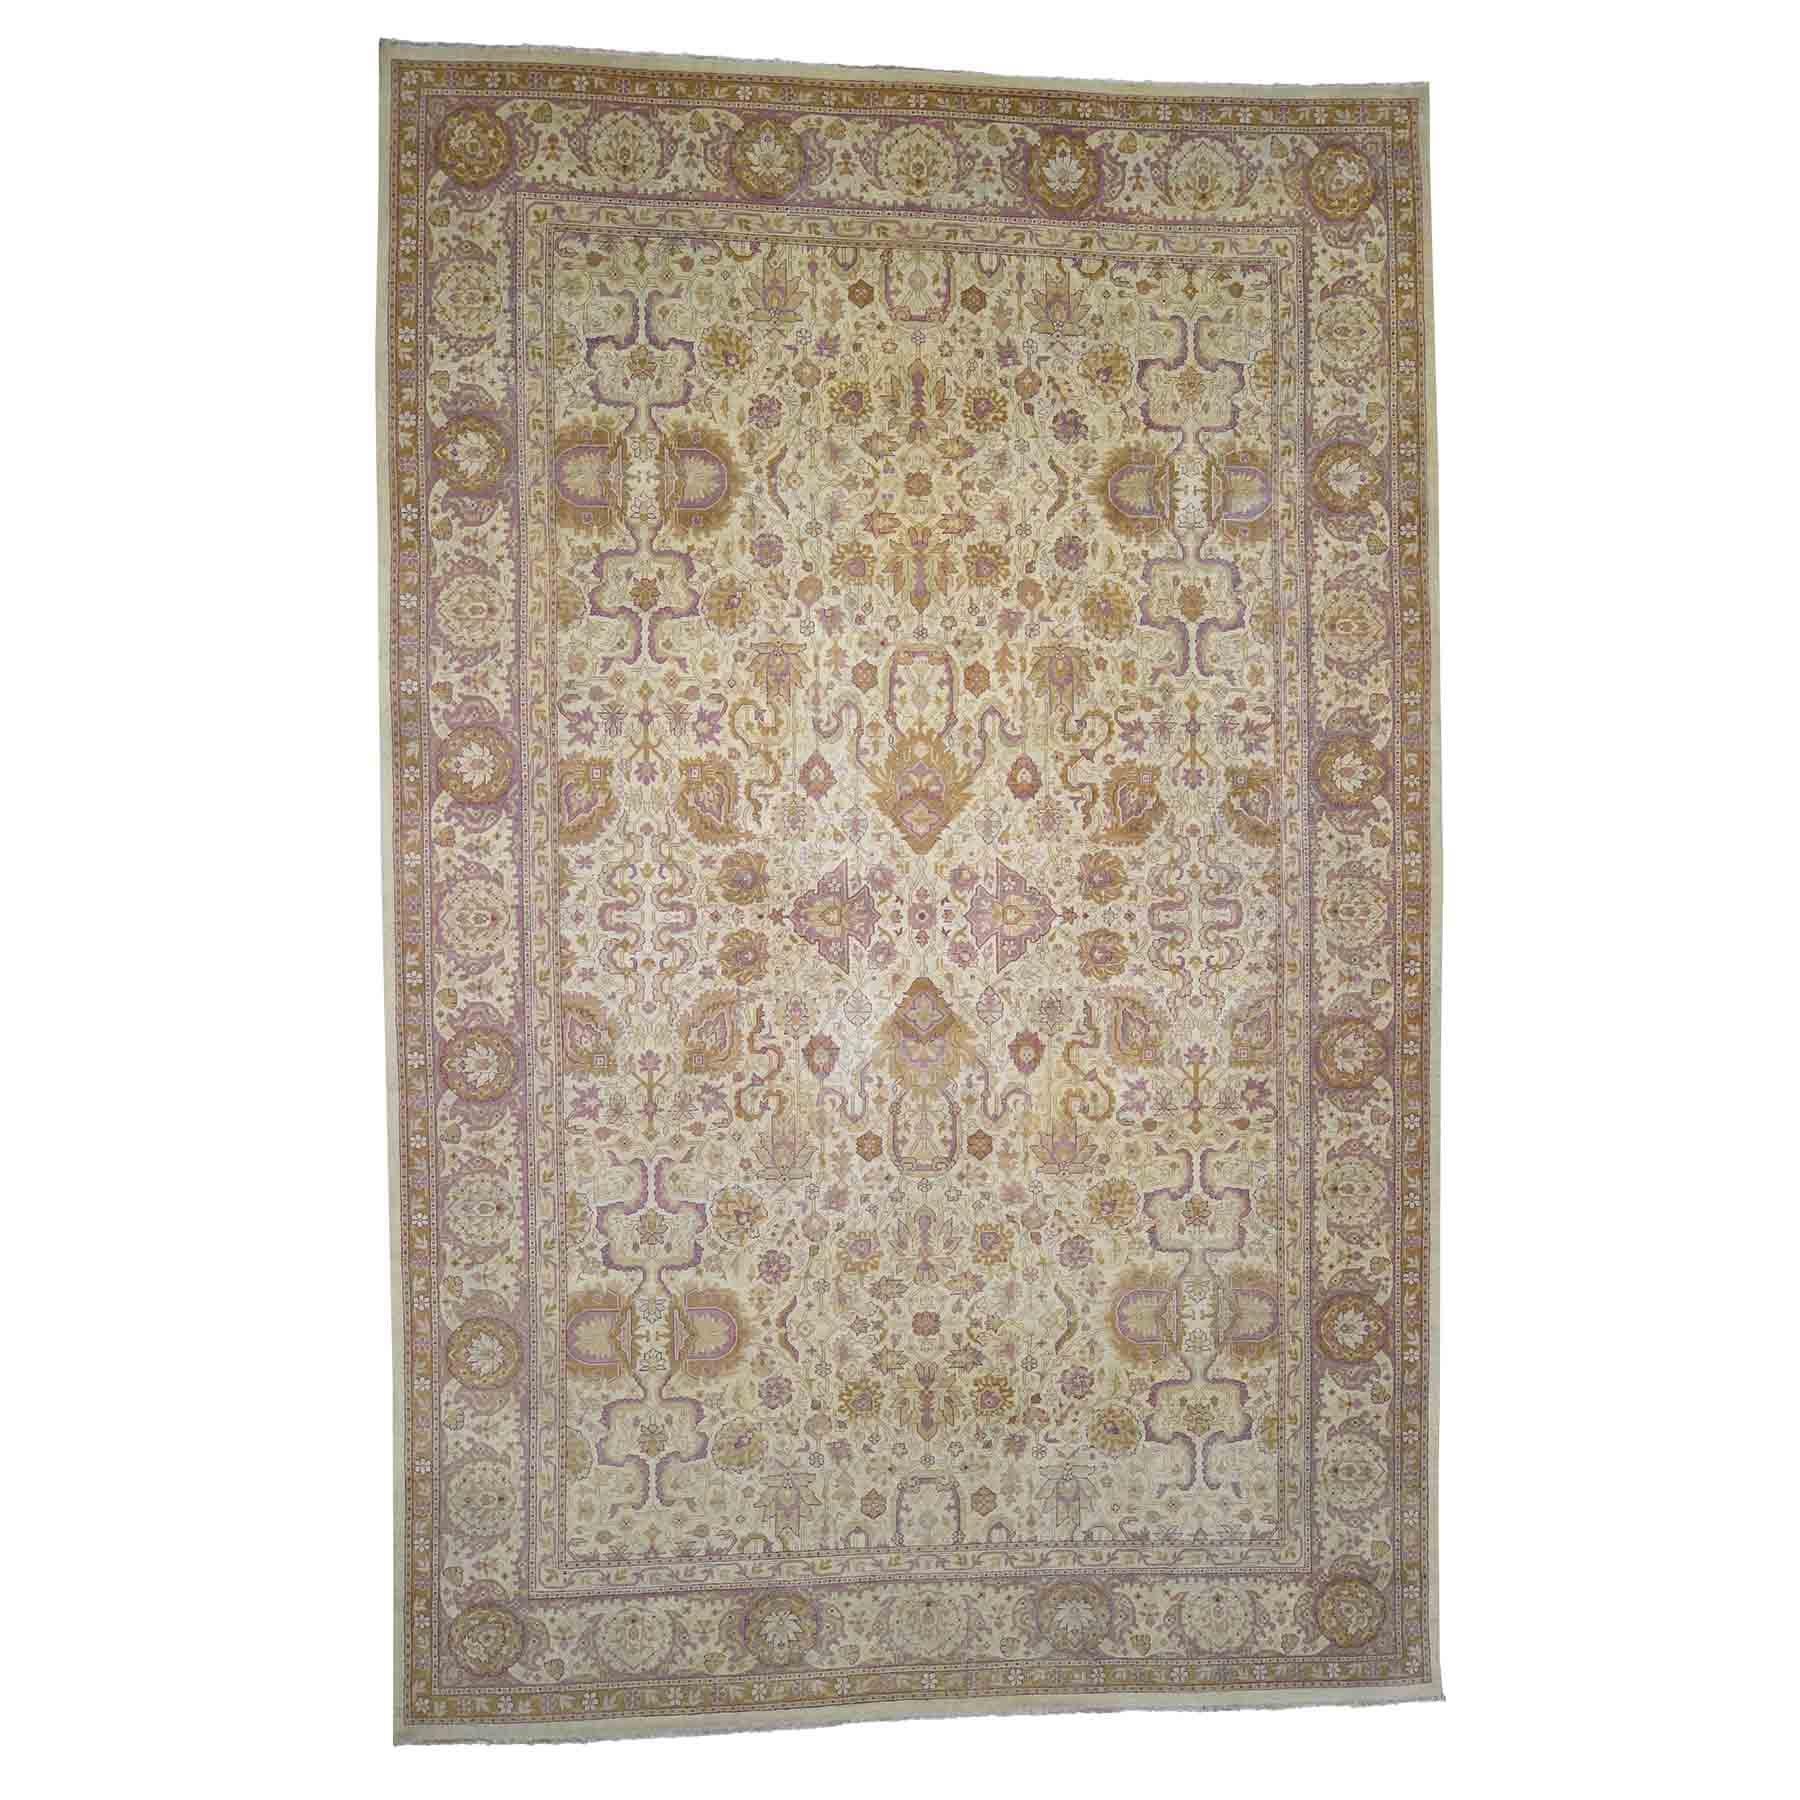 1940's Vintage Mughal Amritsar Hand Knotted Oriental Rug Soft